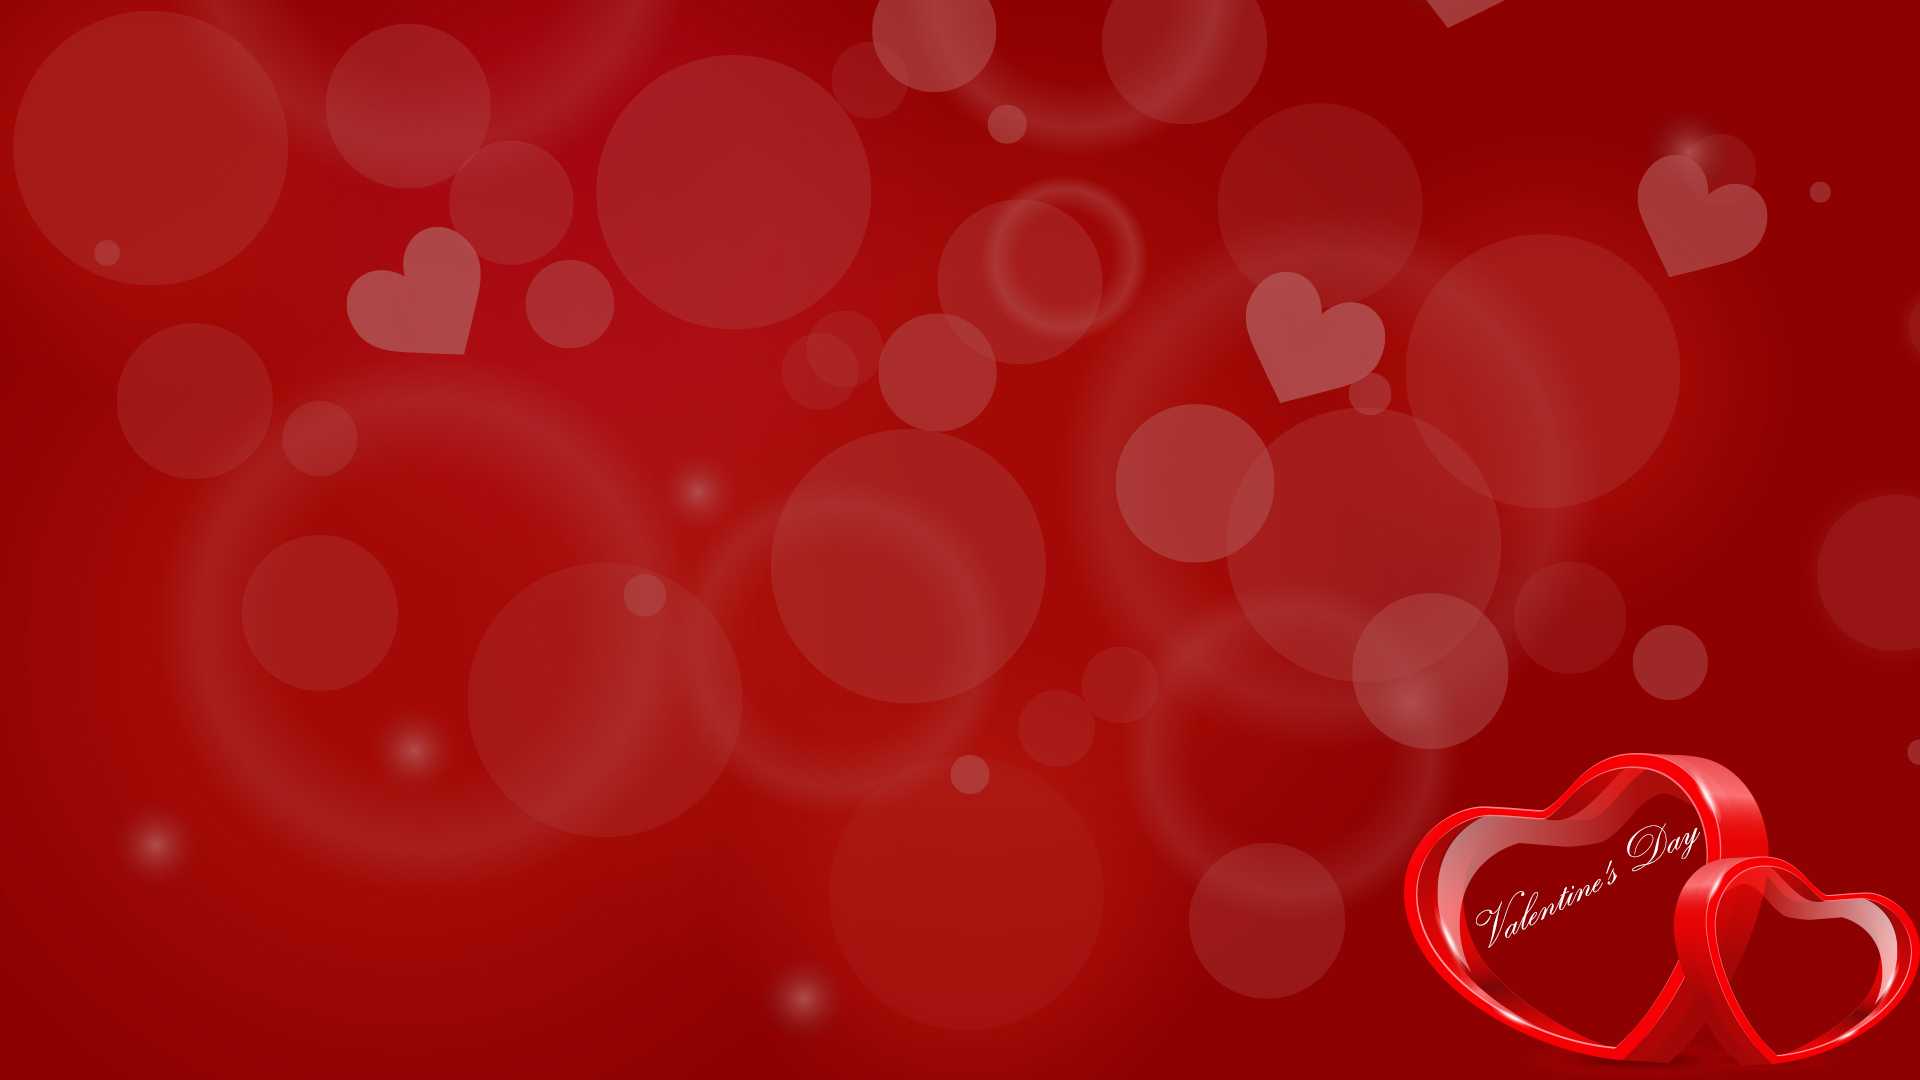 Valentines Day Heart Backgrounds For Powerpoint - Love Ppt Within Valentine Powerpoint Templates Free